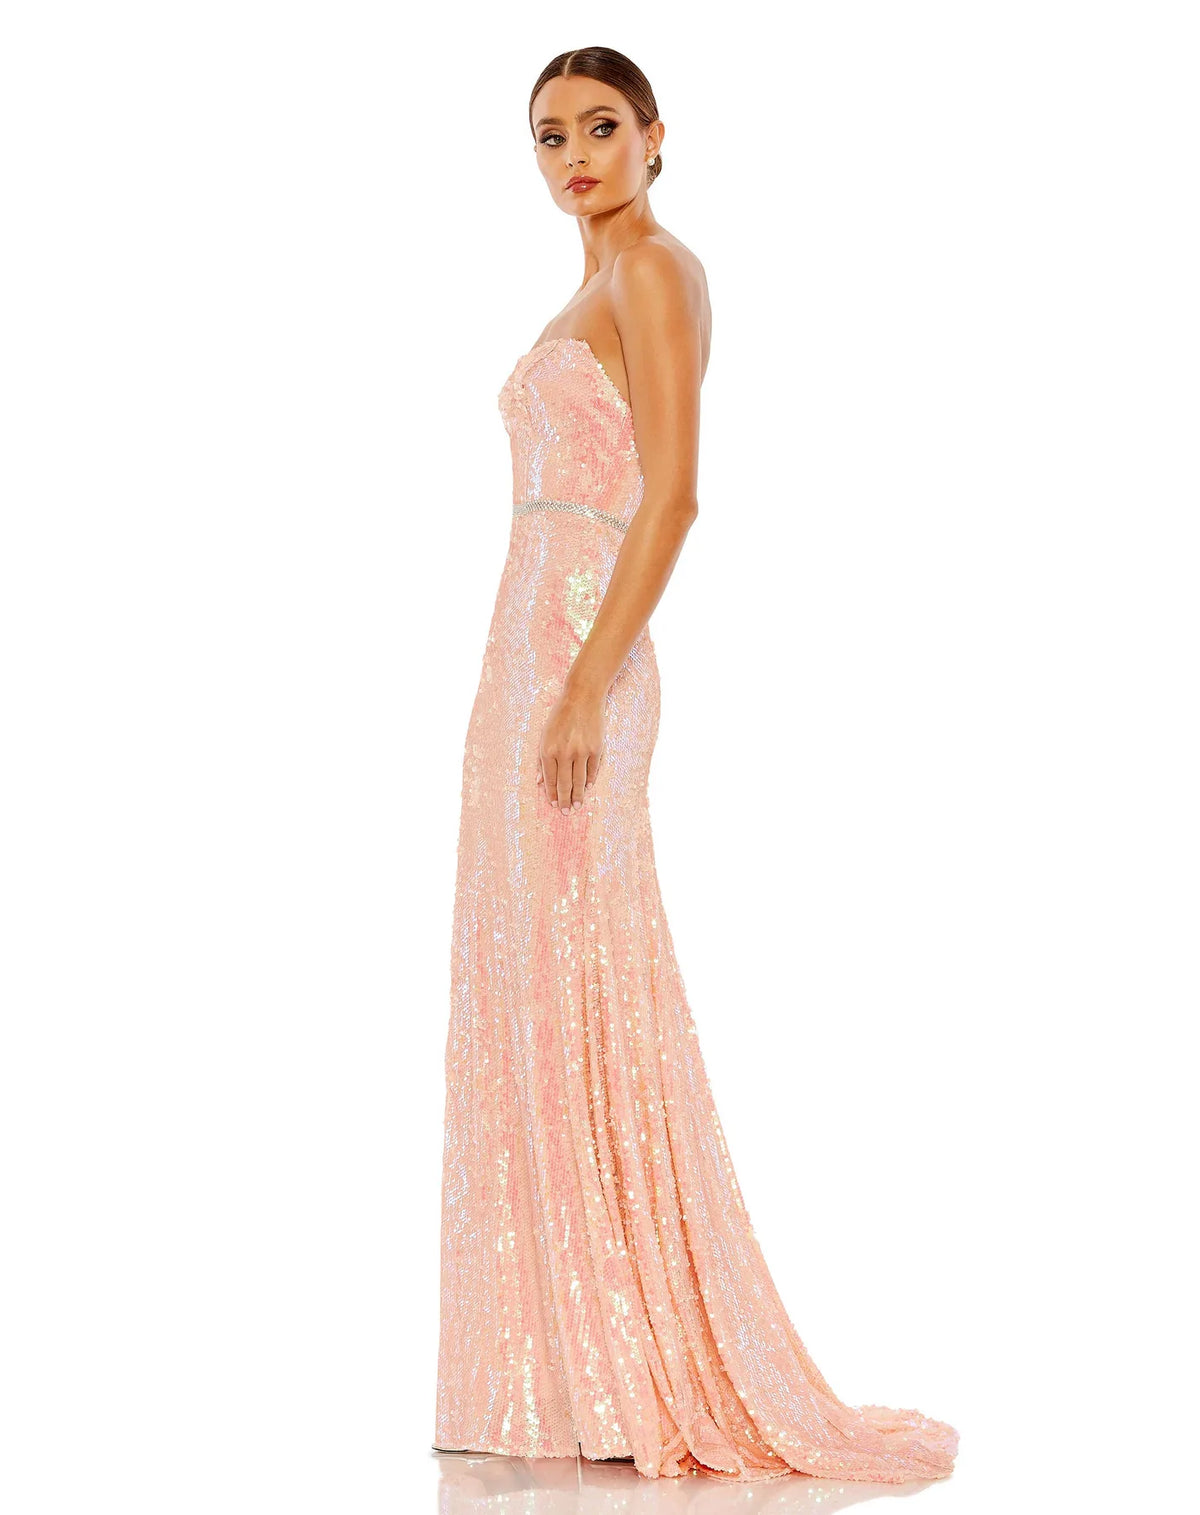 This elegant strapless, coral pink toned, floor length, fitted, formal dress is picture perfect. With an elongating column style and sequinned fabric with a gorgeous crystal belt to cinch in the waist, is finished with a glamorous sweeping train. This gown is perfect for wedding guests, special occasions and proms side view